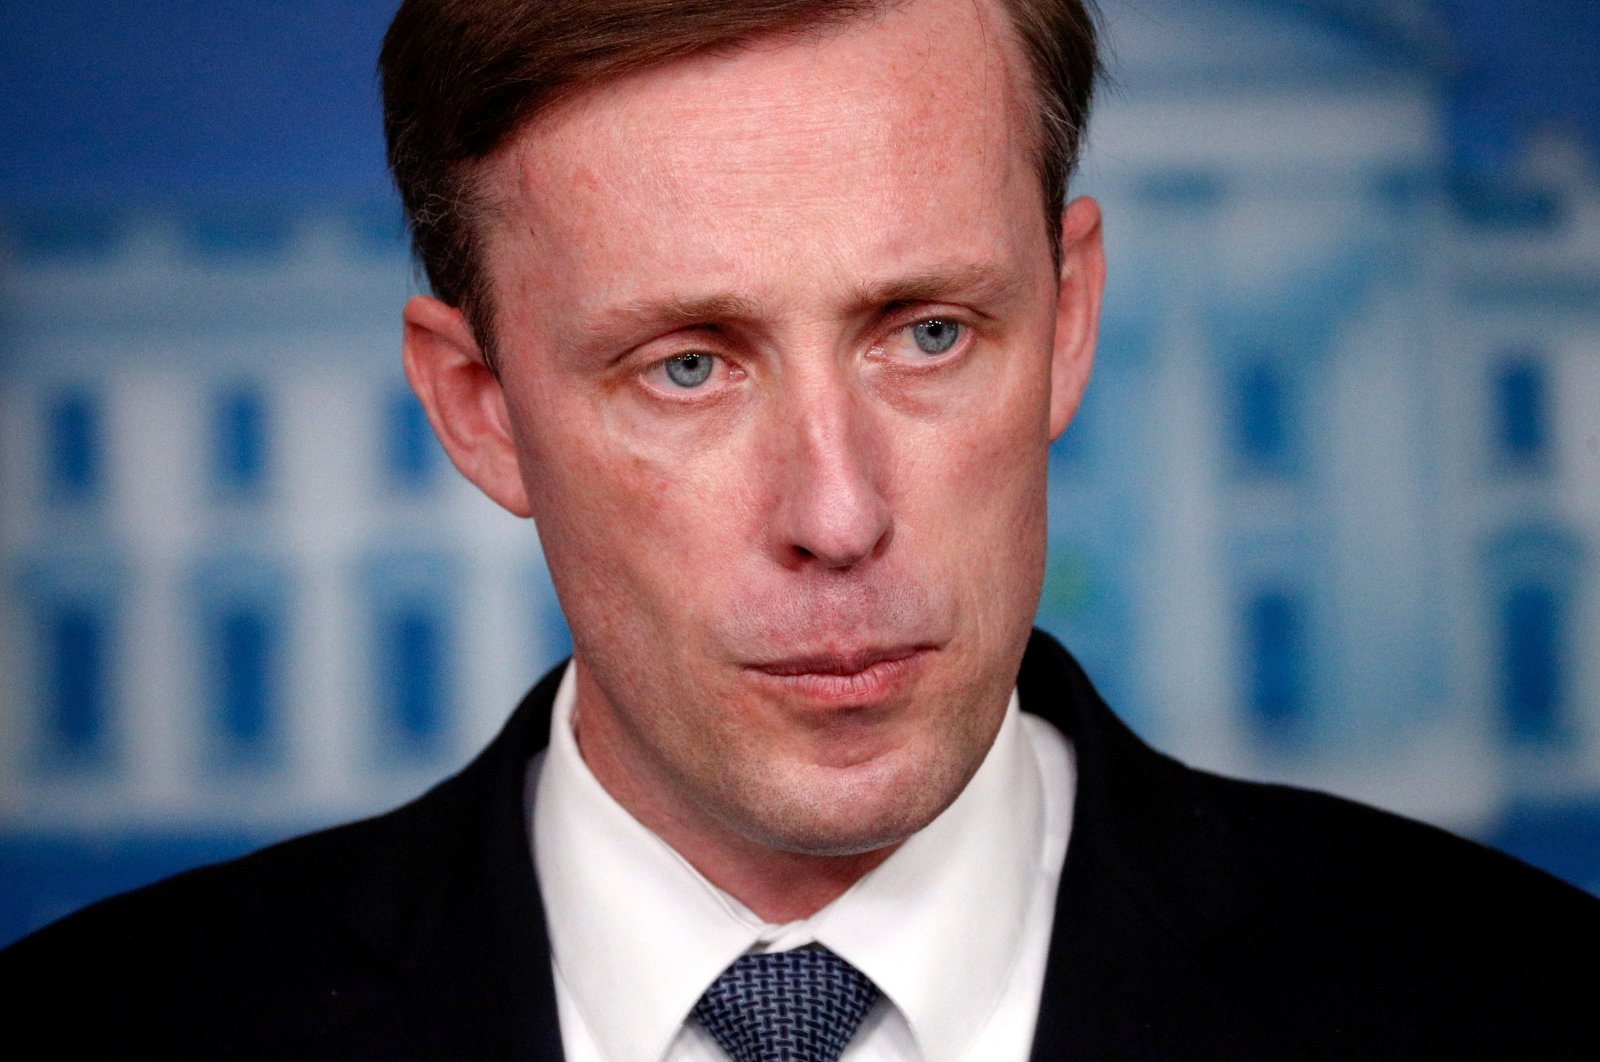 U.S. national security advisor Jake Sullivan speaks during a daily press briefing at the White House in Washington, U.S, Dec. 7, 2021. (Reuters Photo)